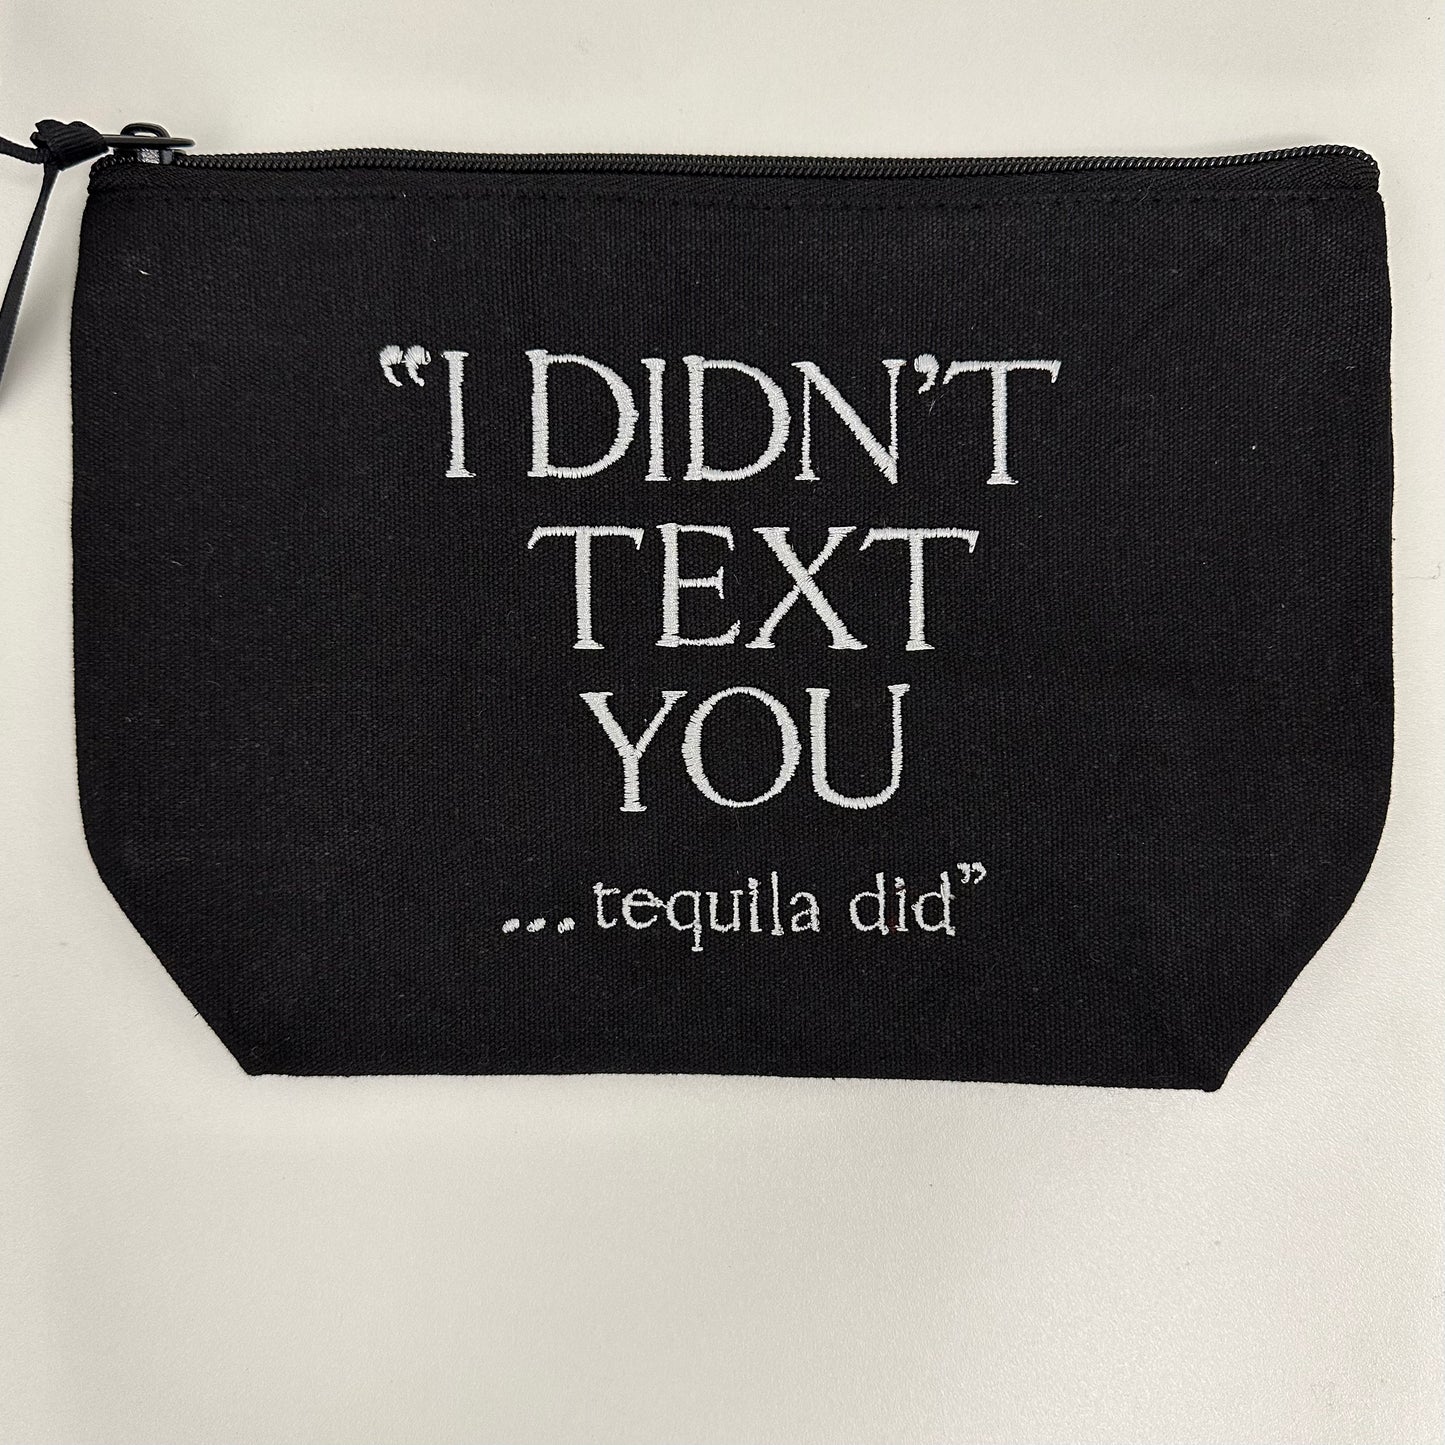 I DIDN'T TEXT YOU-TEQUILA DID POUCH